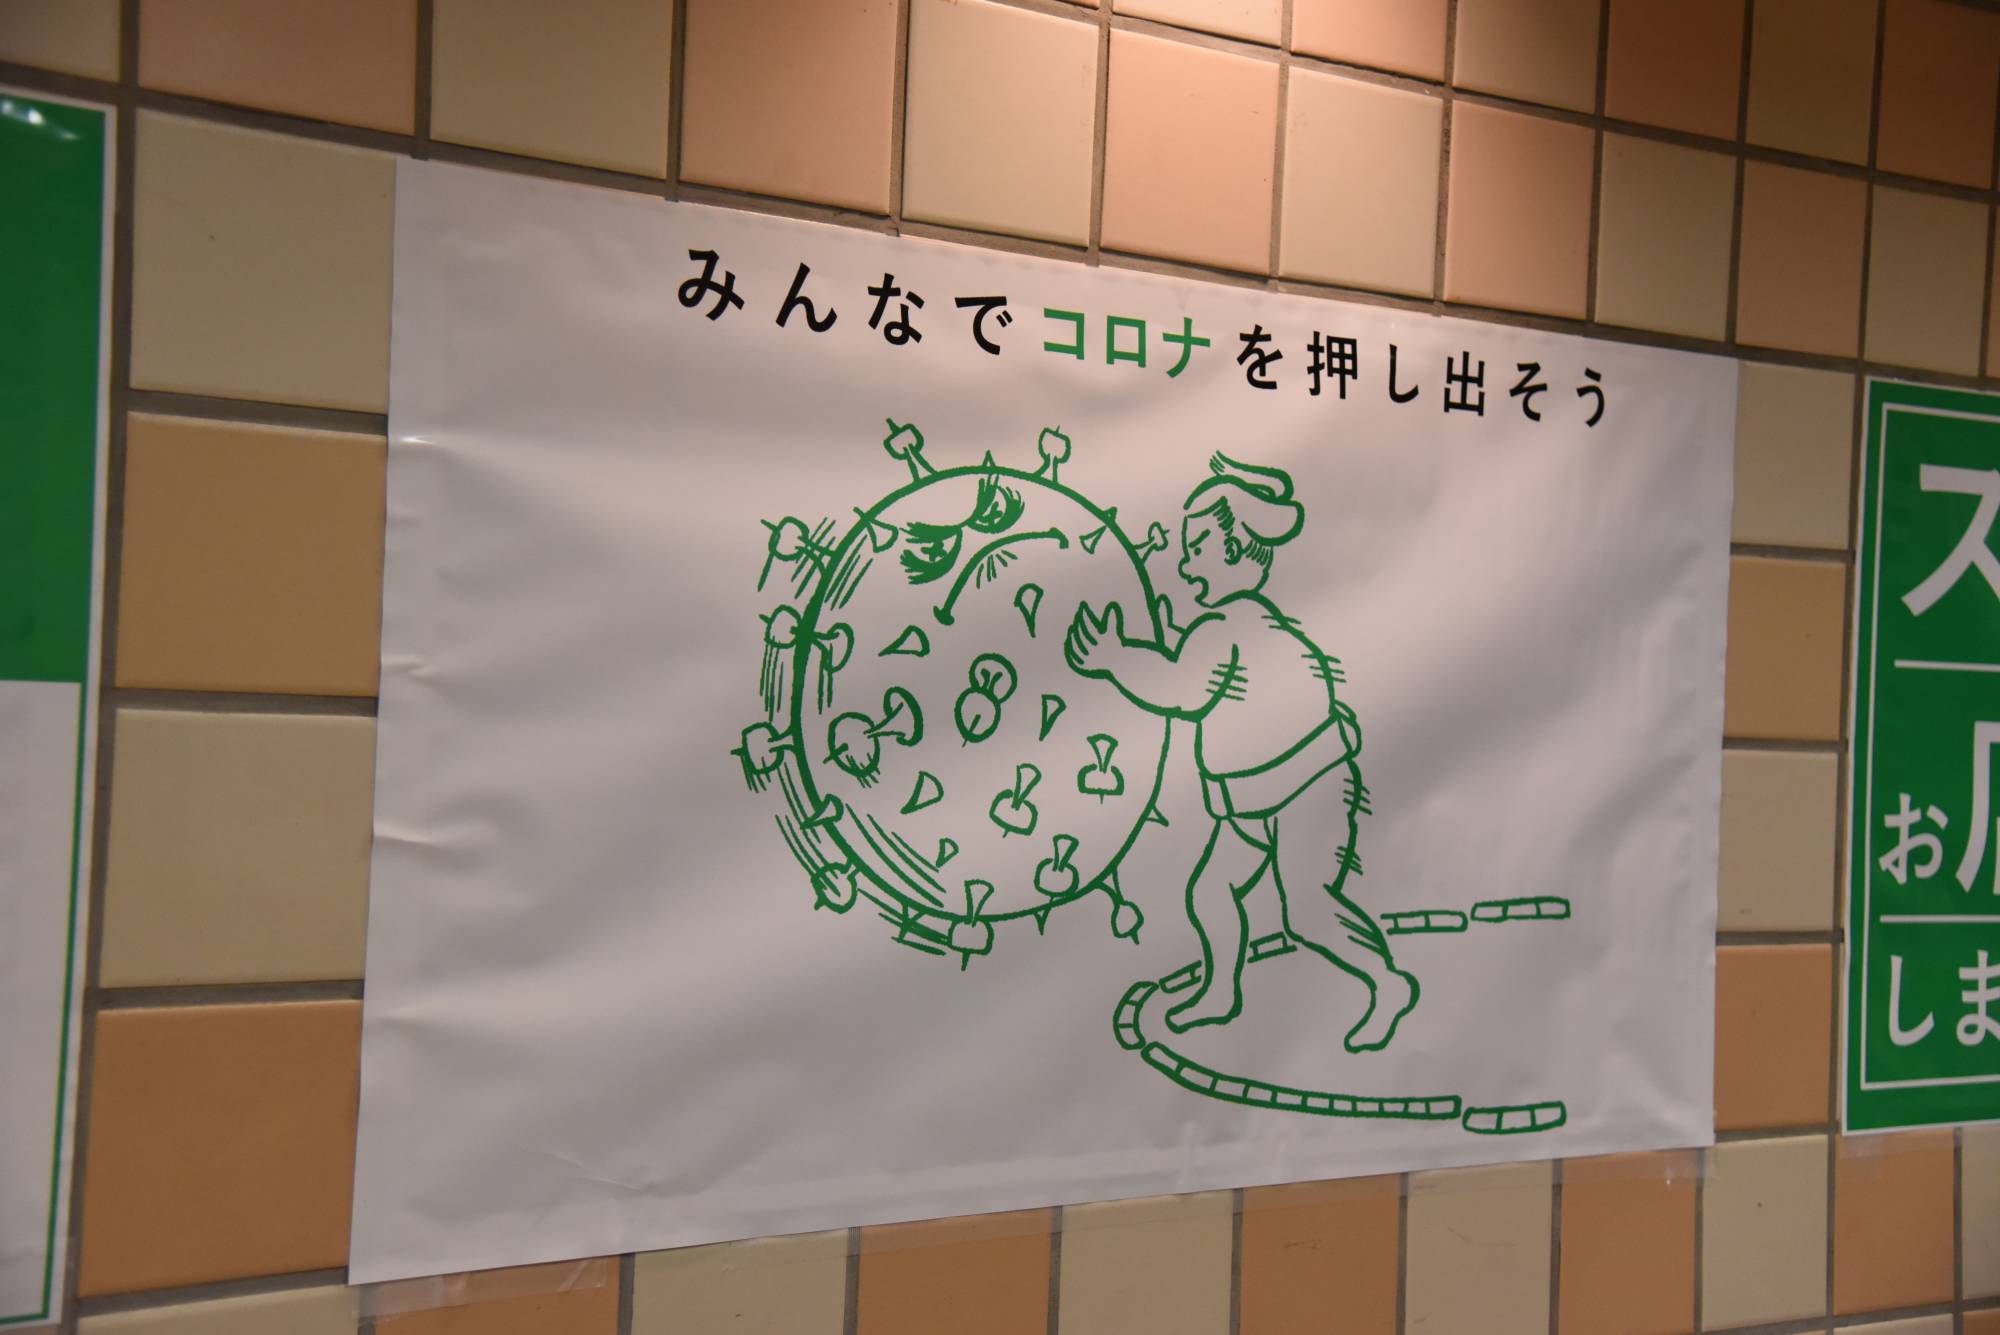 A poster reading 'Let's push out corona together' is displayed in the concourse at Ryogoku Kokugikan. | DAN ORLOWITZ